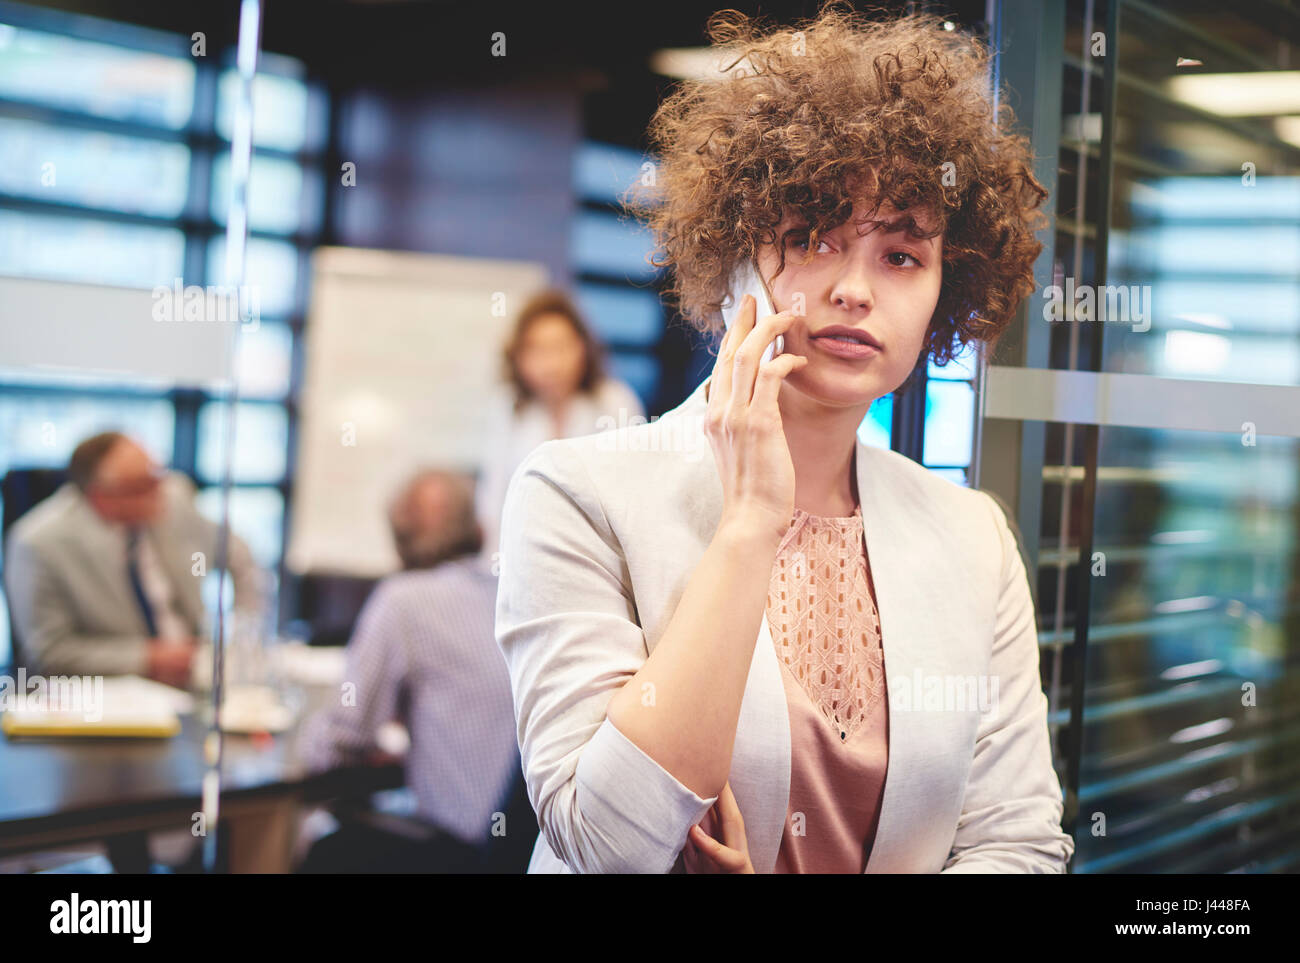 Business woman having a phone call at work Stock Photo